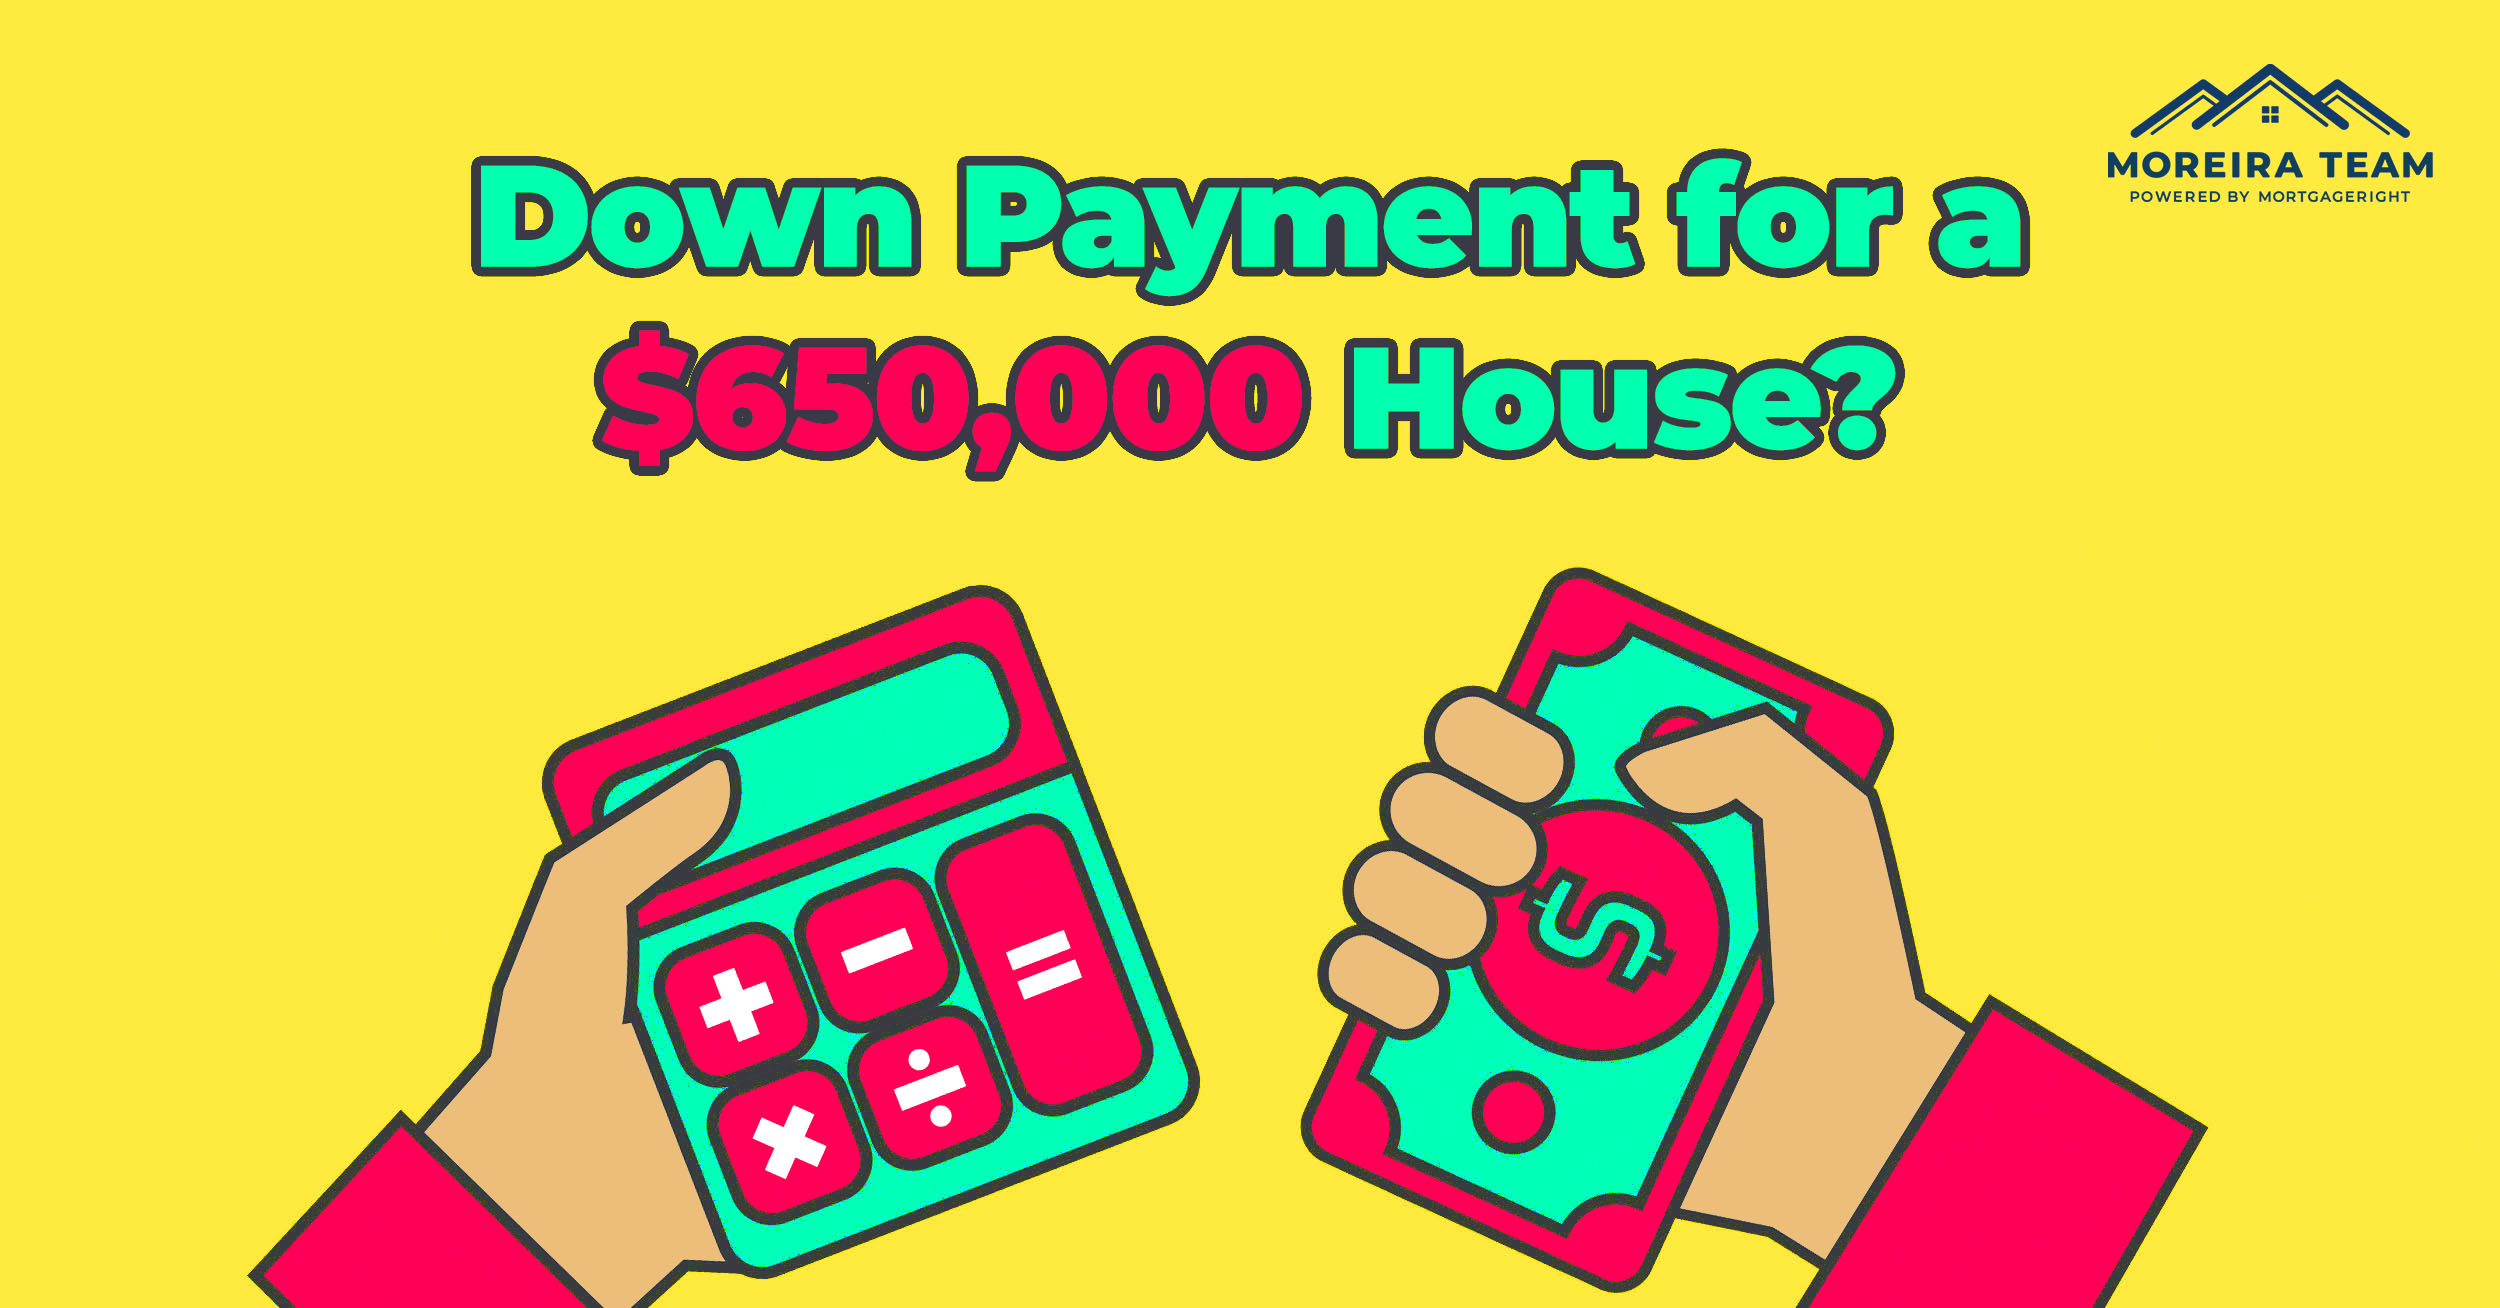 Down payment amount on a $650,000 house